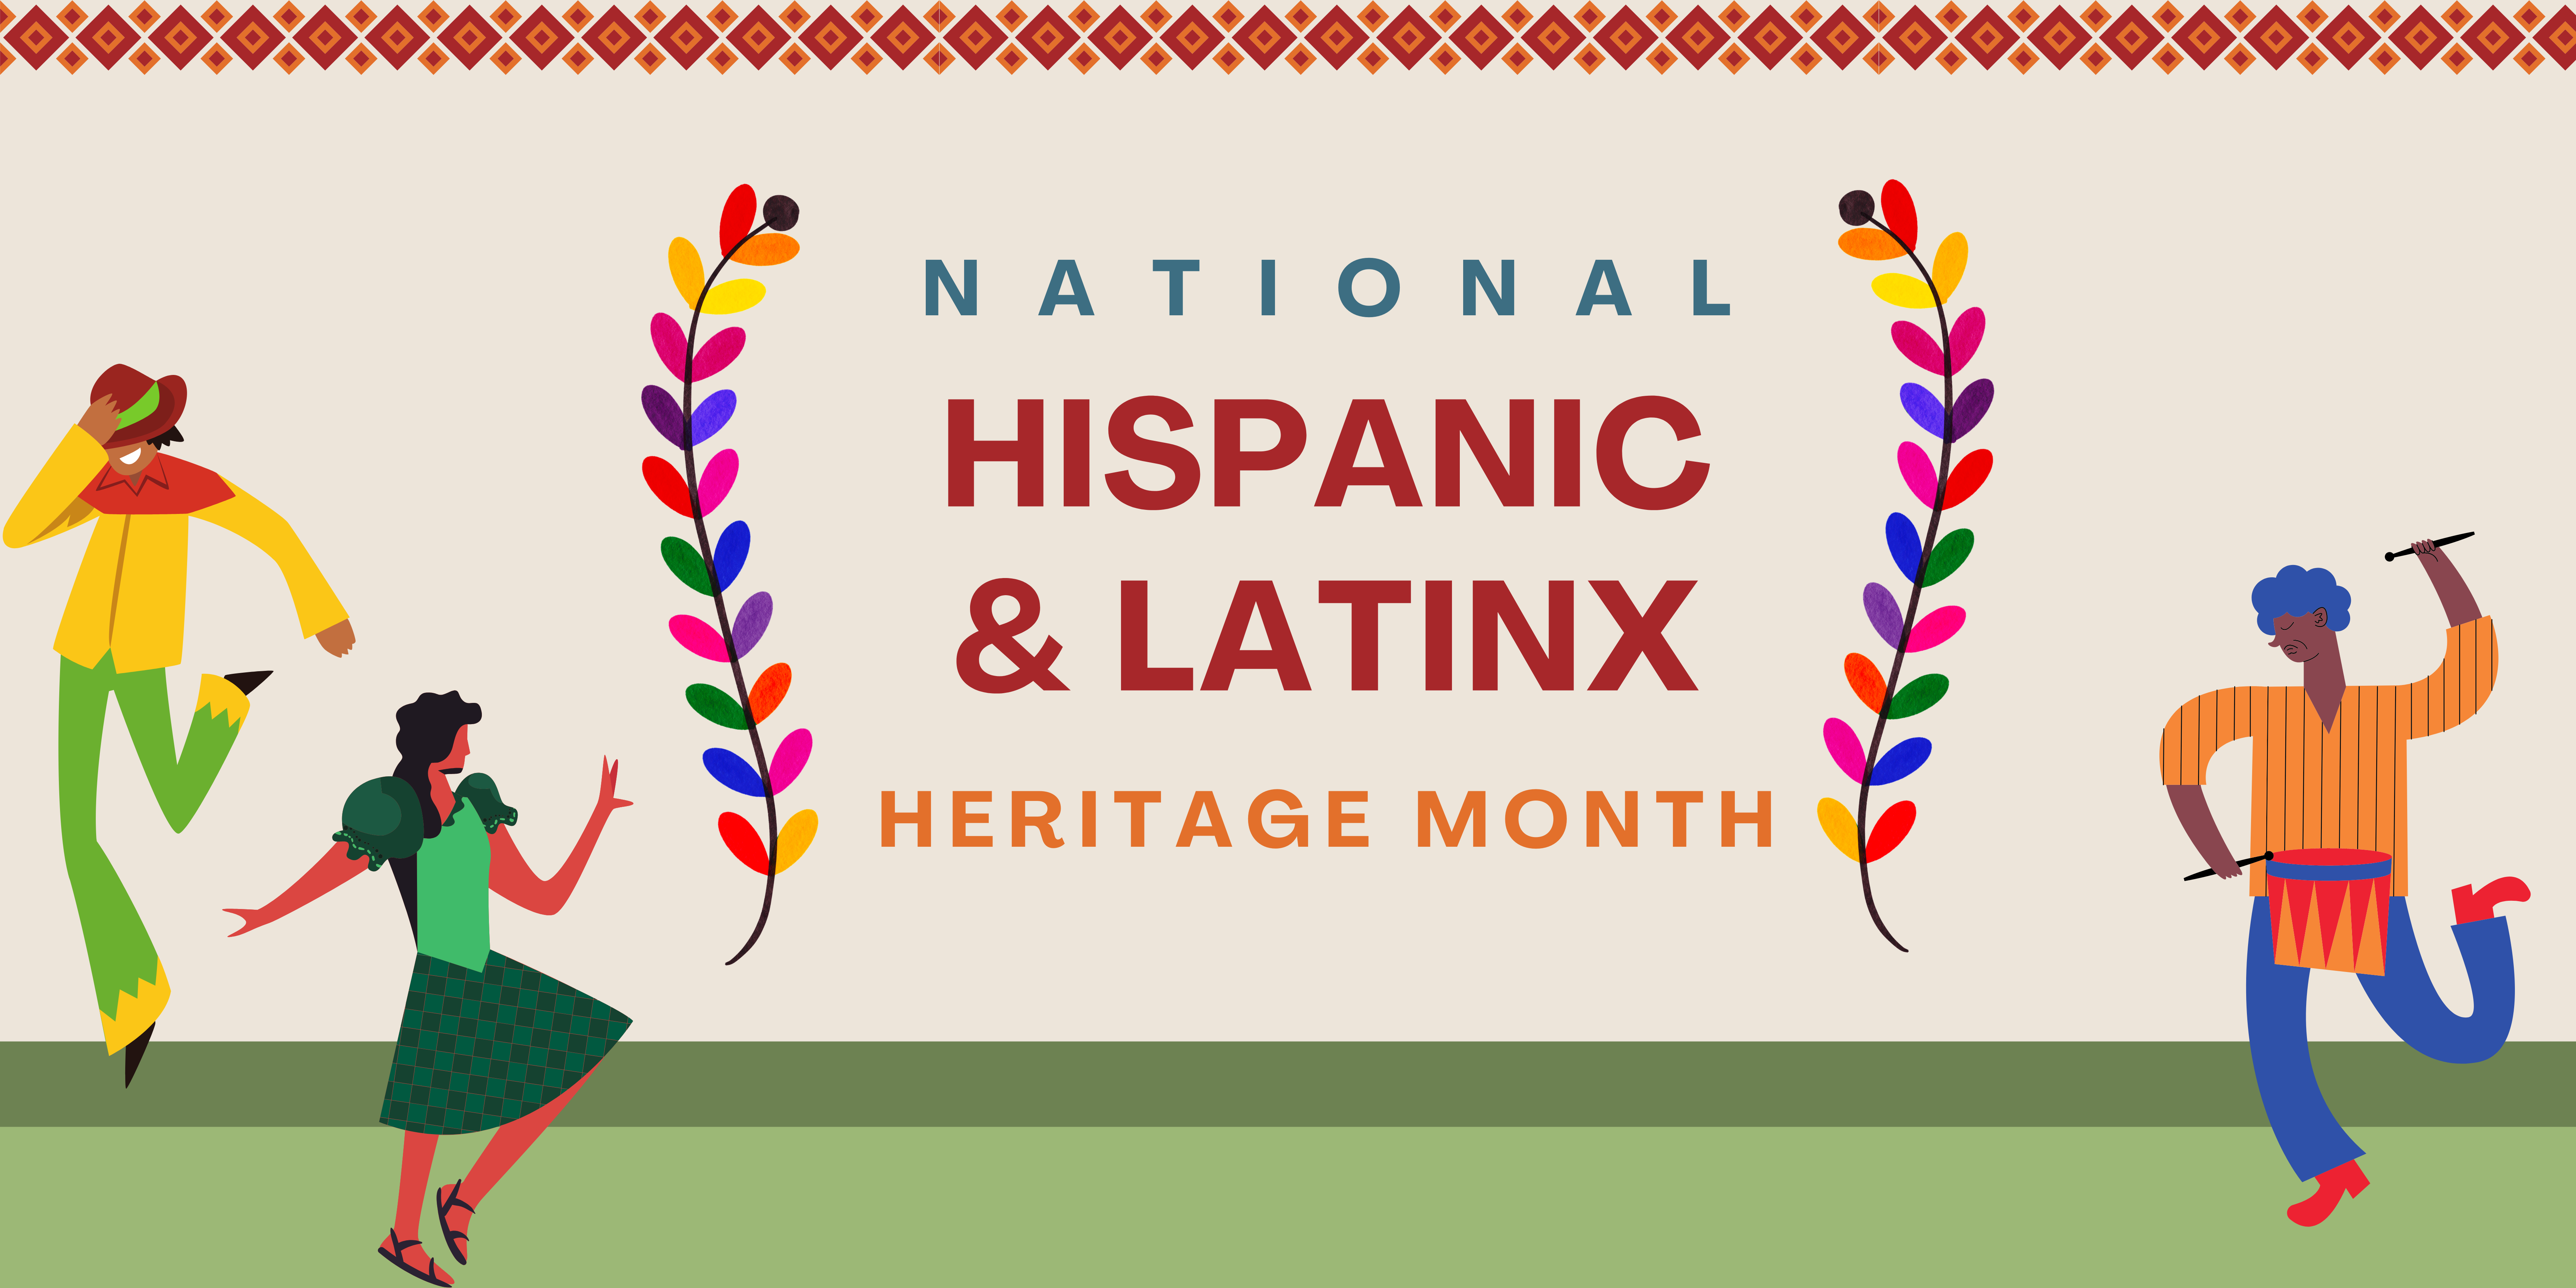 A banner celebrating National Hispanic and Latinx Heritage Month with dancing cartoons and a colorful design